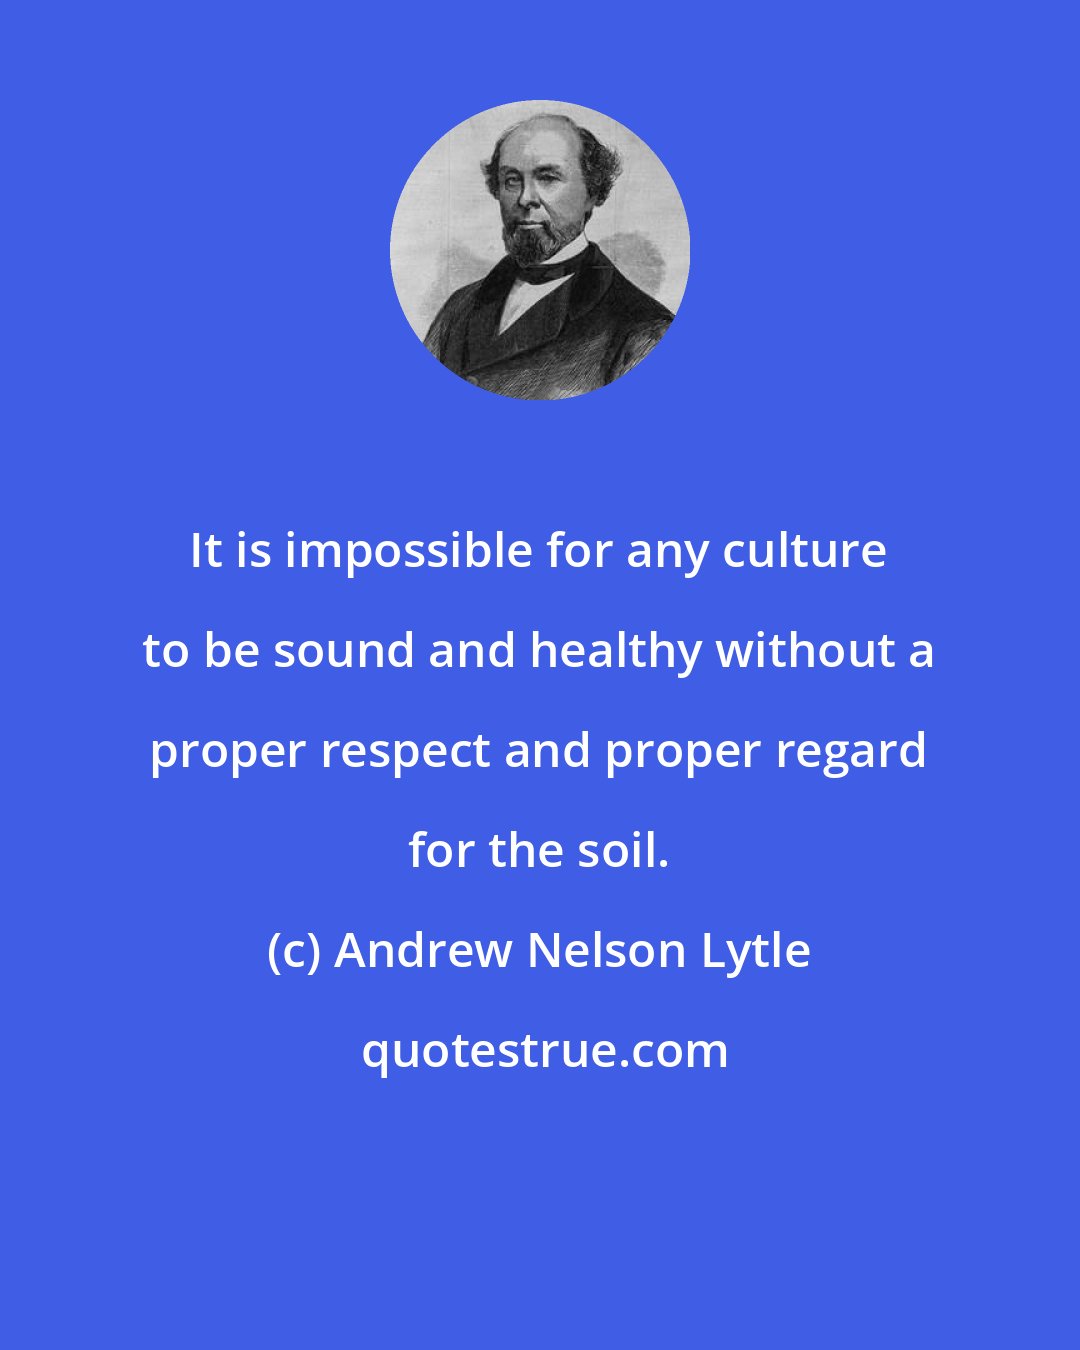 Andrew Nelson Lytle: It is impossible for any culture to be sound and healthy without a proper respect and proper regard for the soil.